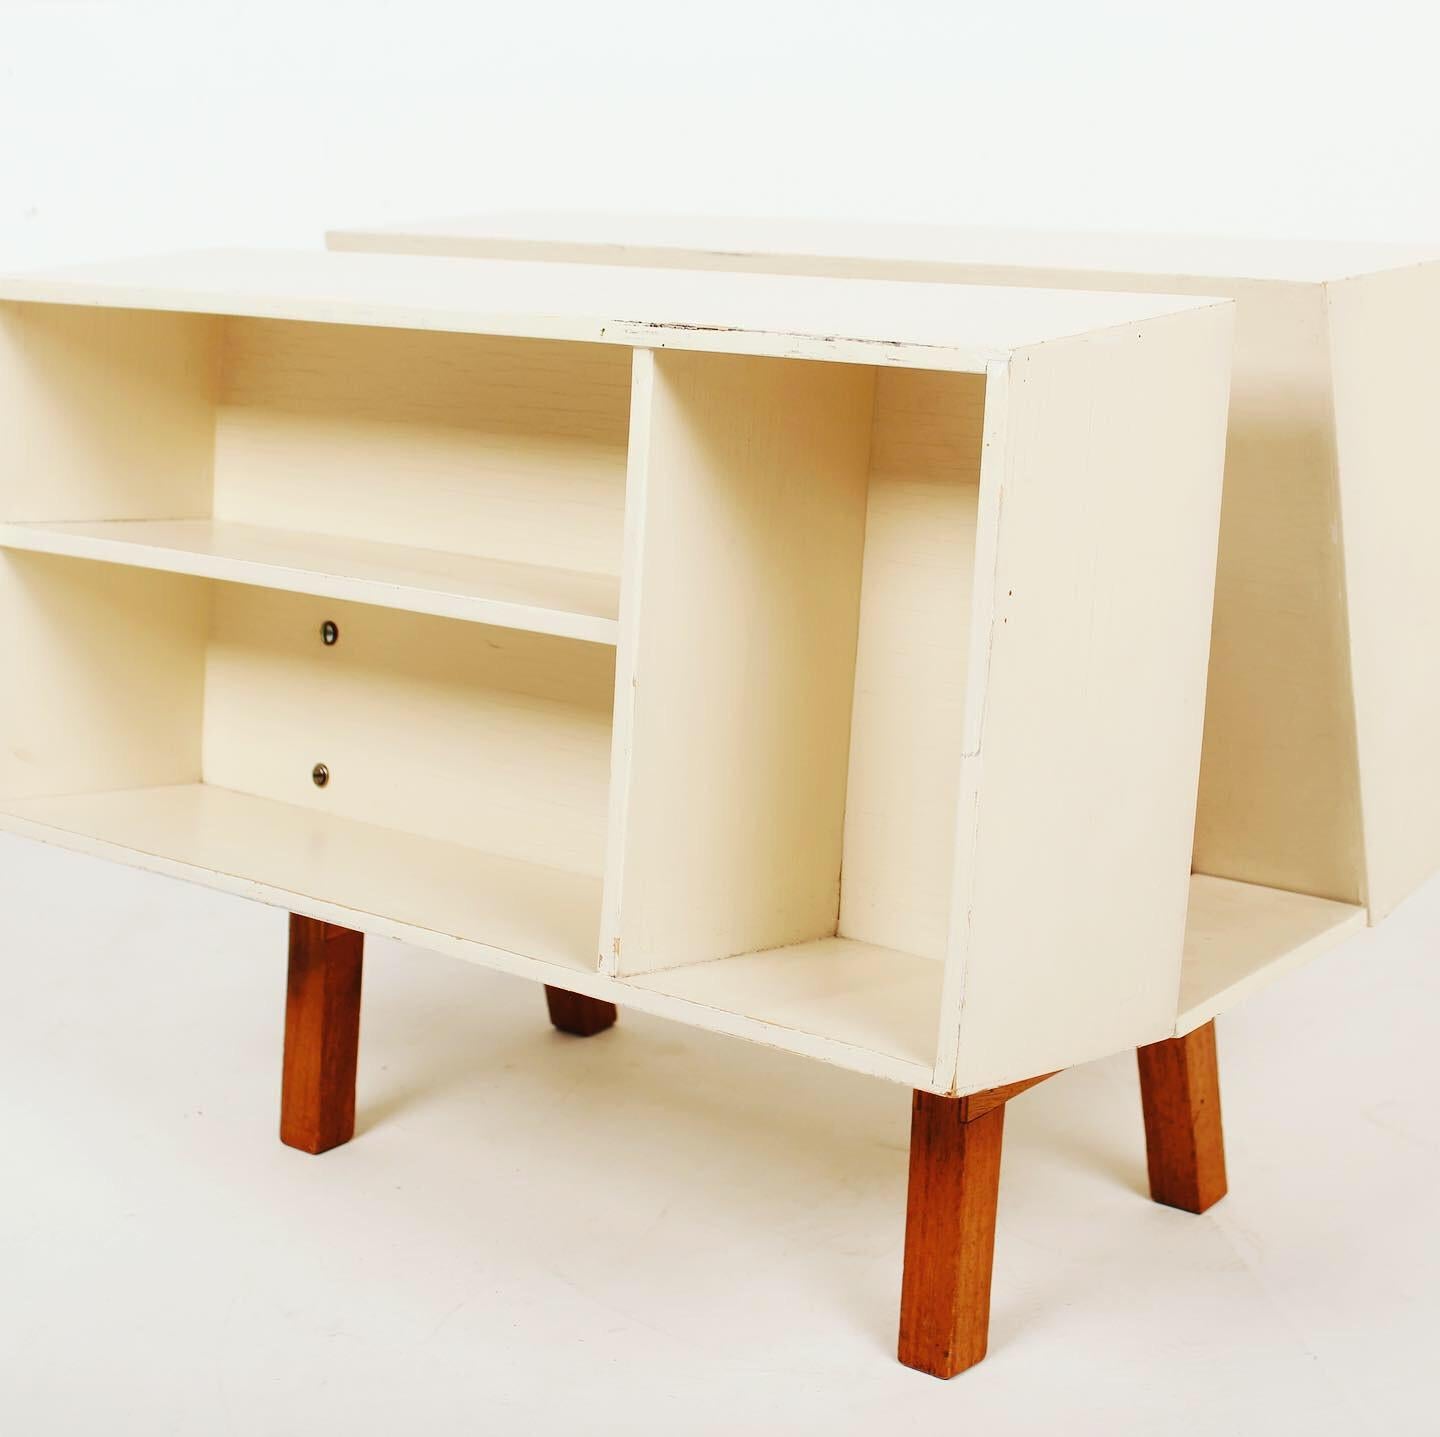 The bookcase Penguin Donkey Mark 2 was designed in 1963 after Jack Pritchard asked to Ernest Race to reconfigure Egon Riss's original design to include a flat top that would allow it to be used as a side table. White painted wood with legs in cherry